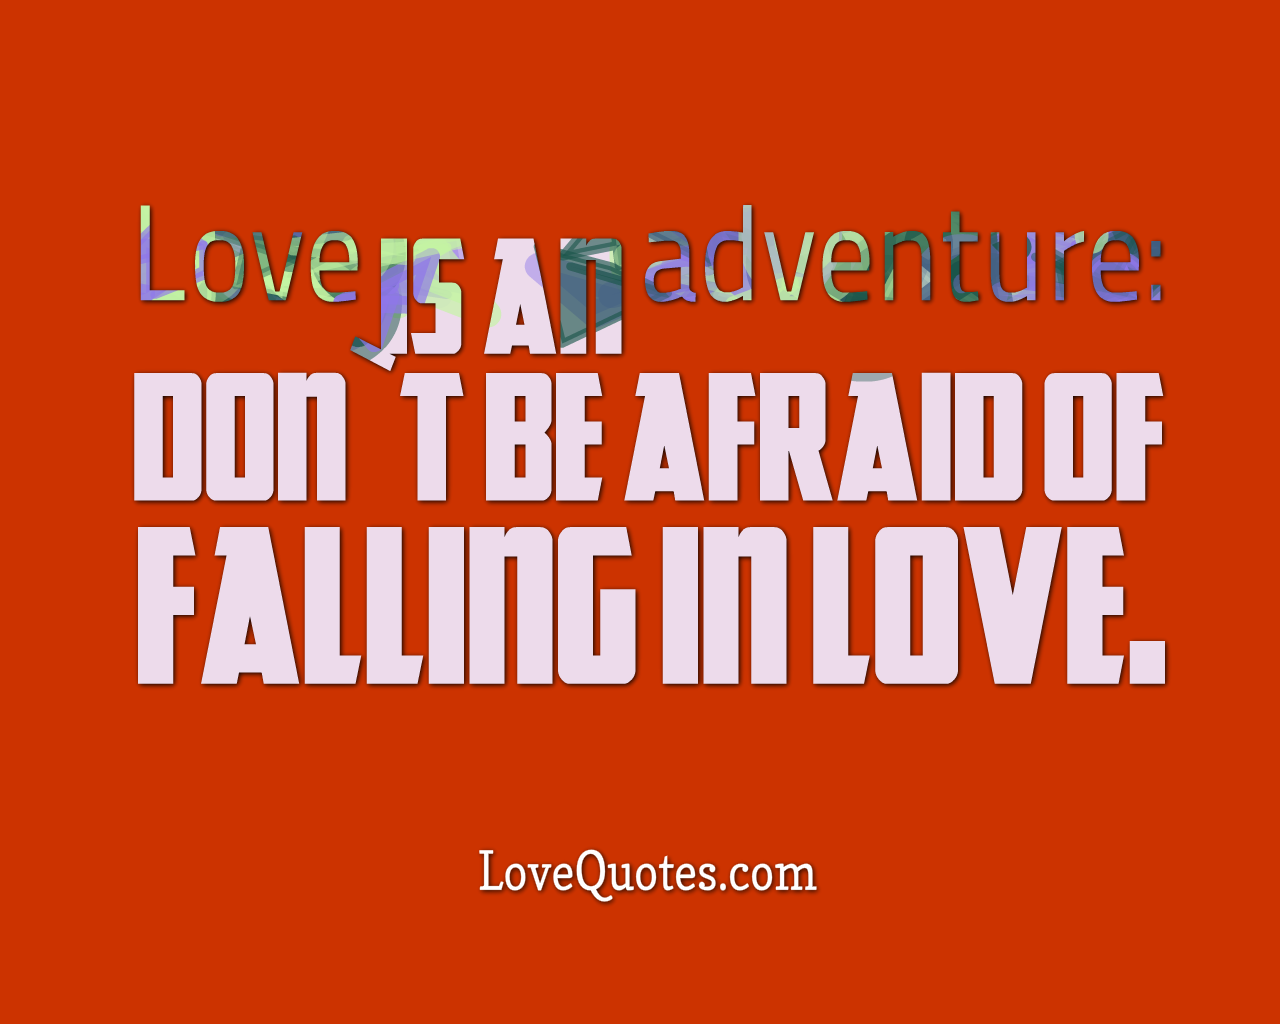 Love Is An Adventure - Love Quotes